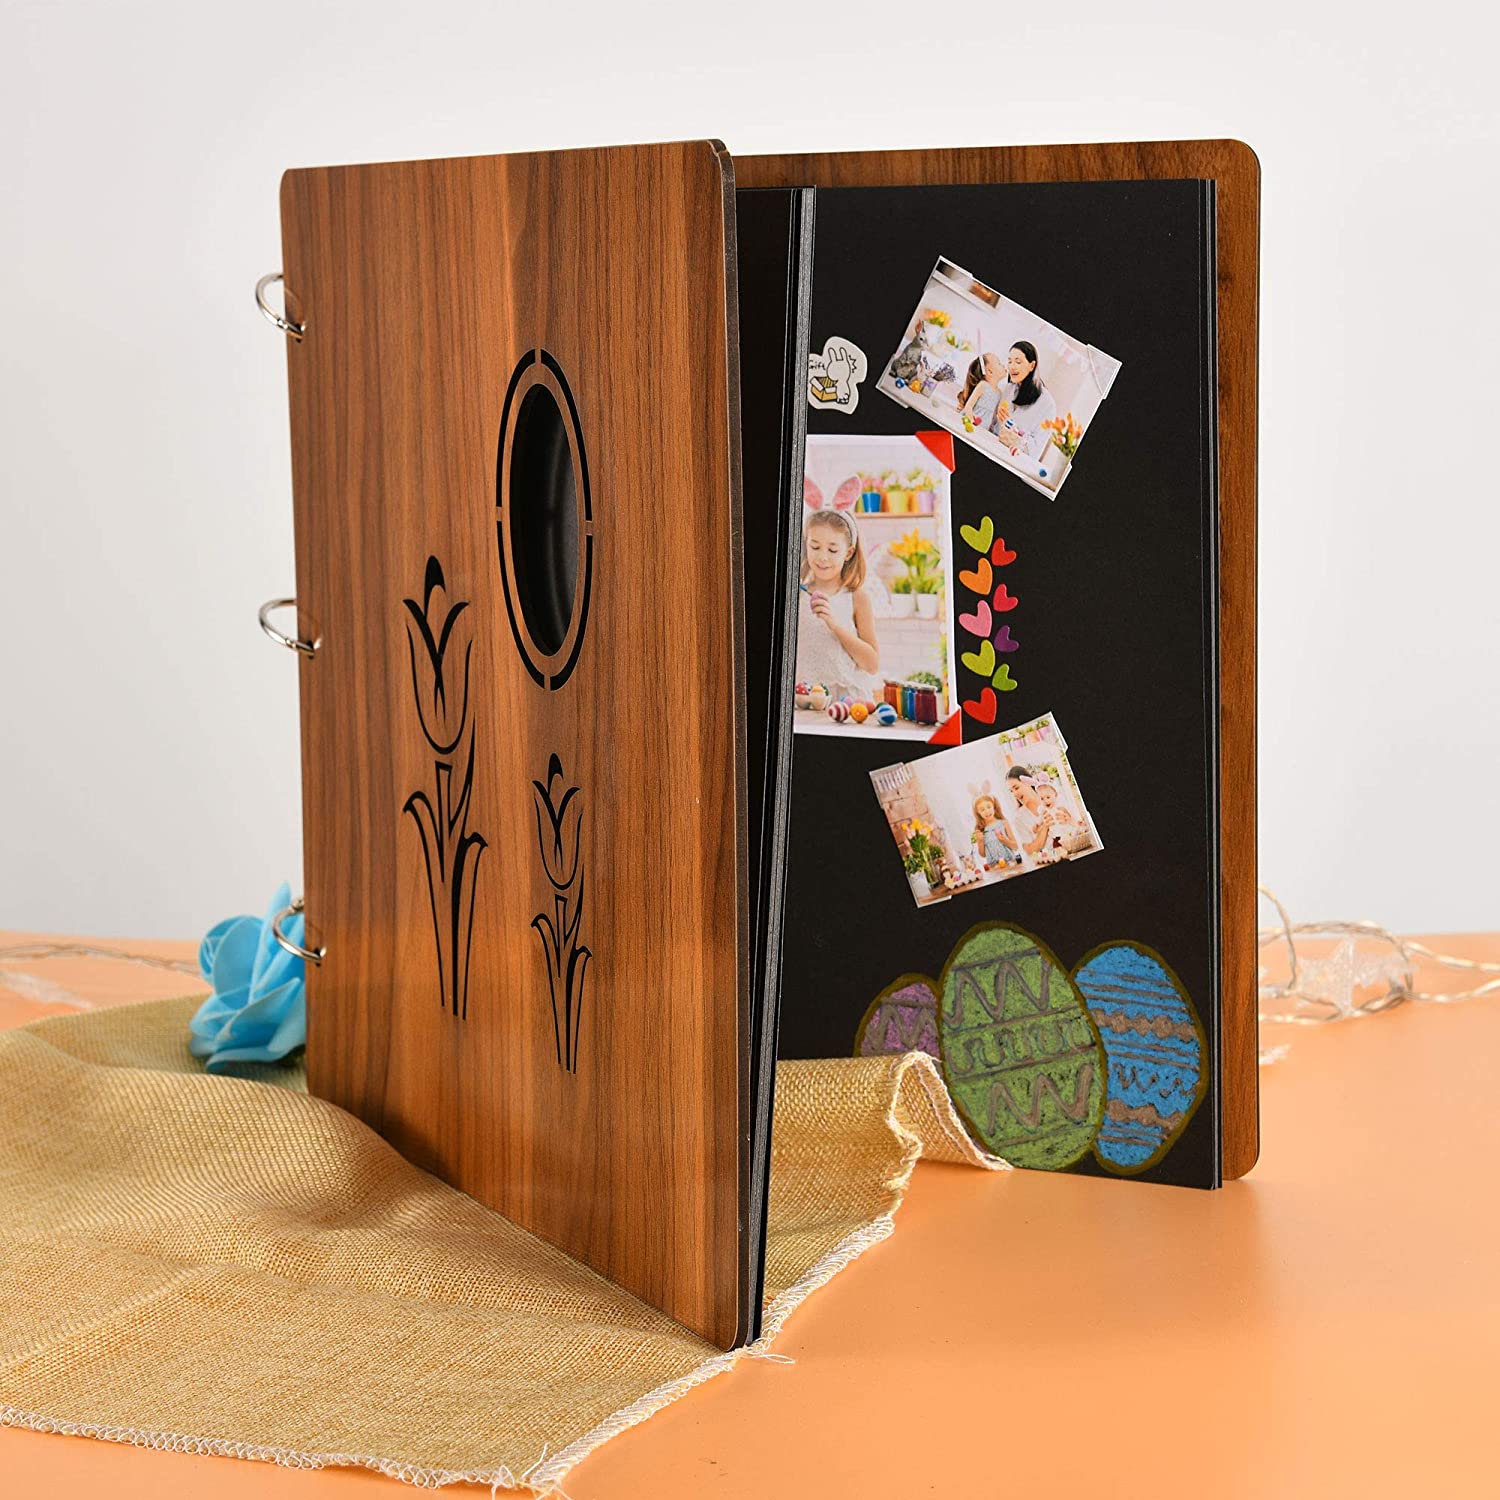 ''Tulip 3 RING DIY Wooden Photo Album for 4x6 Photos | 30 Pages of Adventure Book Holds 500 Photos | 